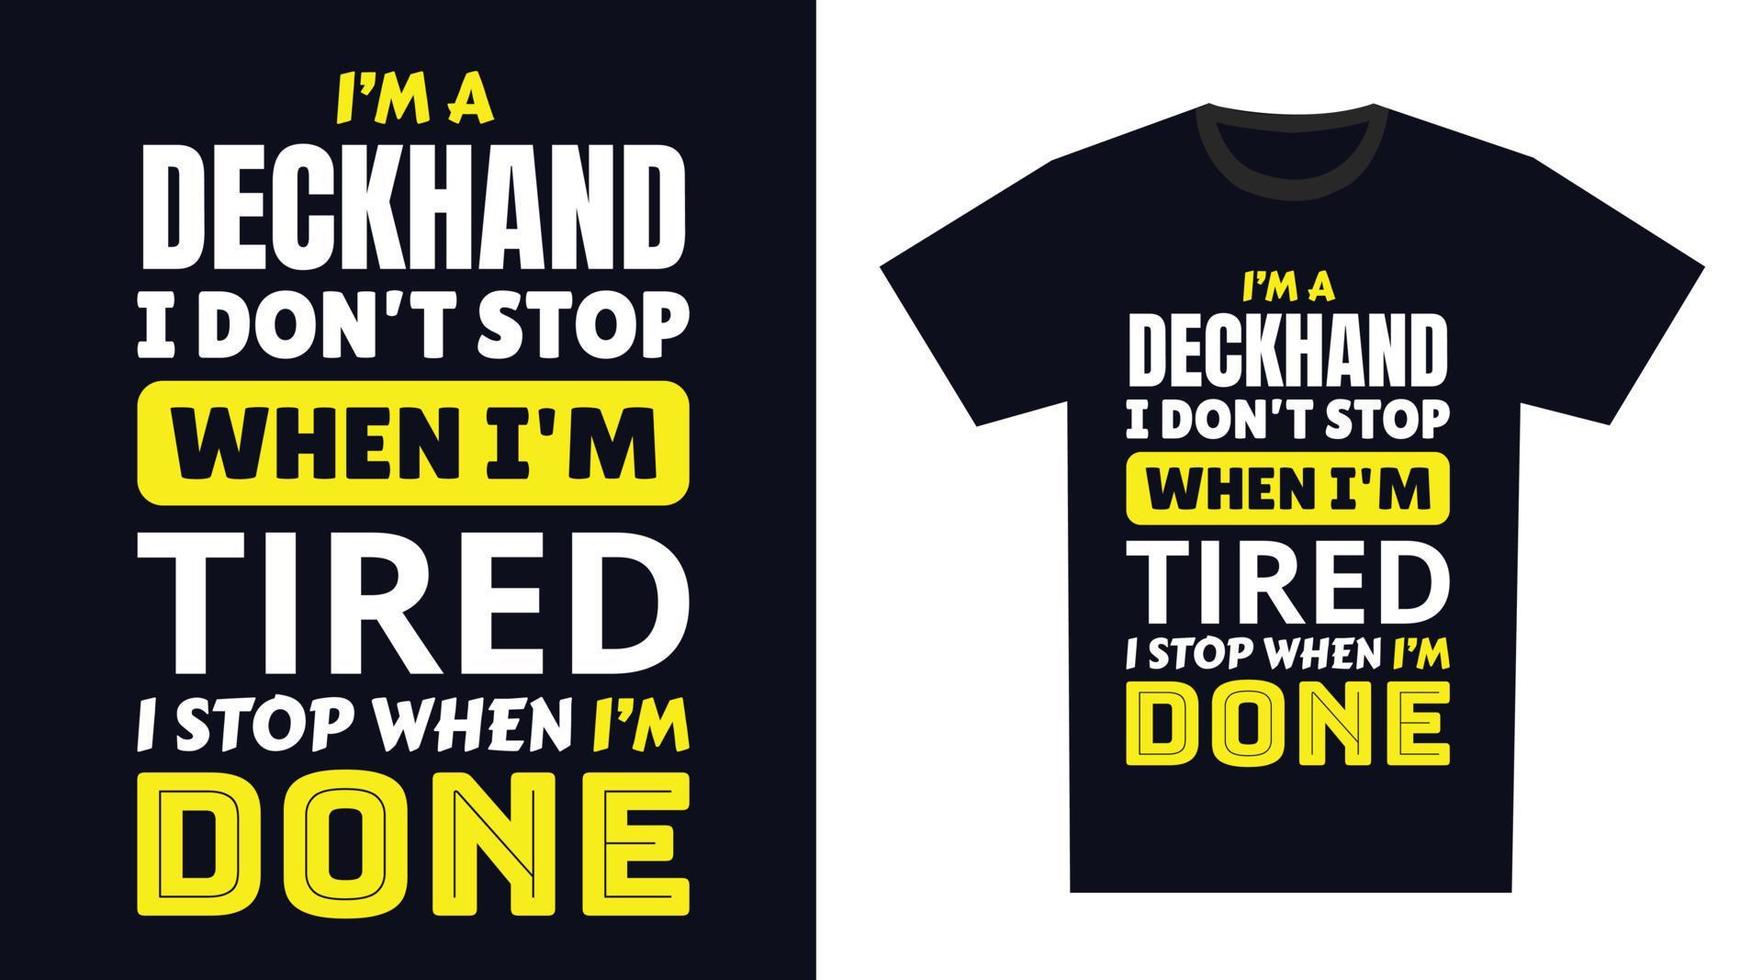 Deckhand T Shirt Design. I 'm a Deckhand I Don't Stop When I'm Tired, I Stop When I'm Done vector